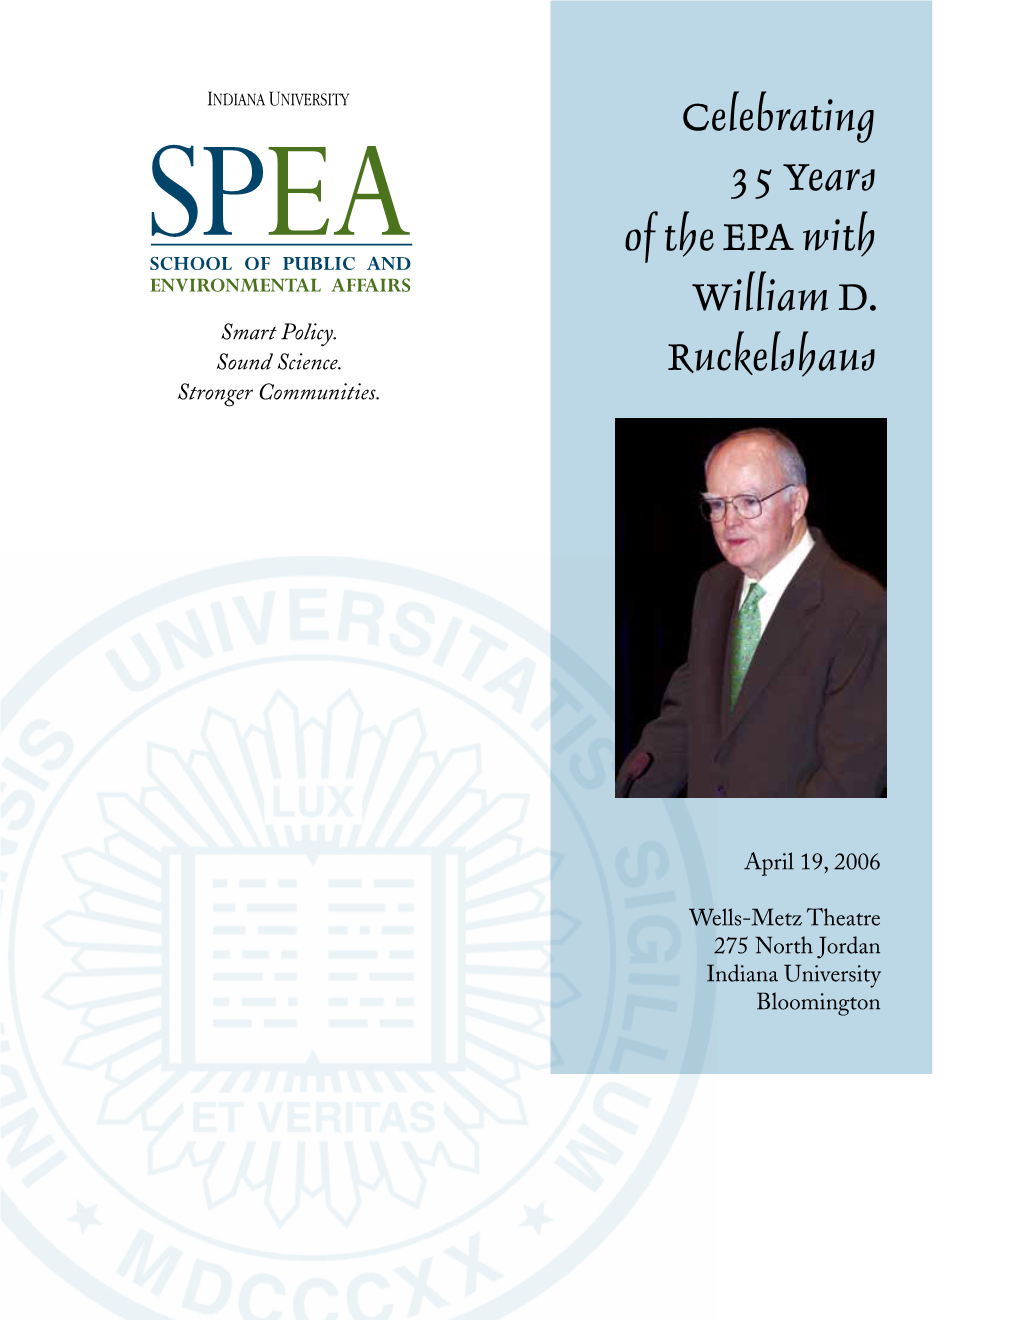 Celebrating 35 Years of the EPA with William D. Ruckelshaus